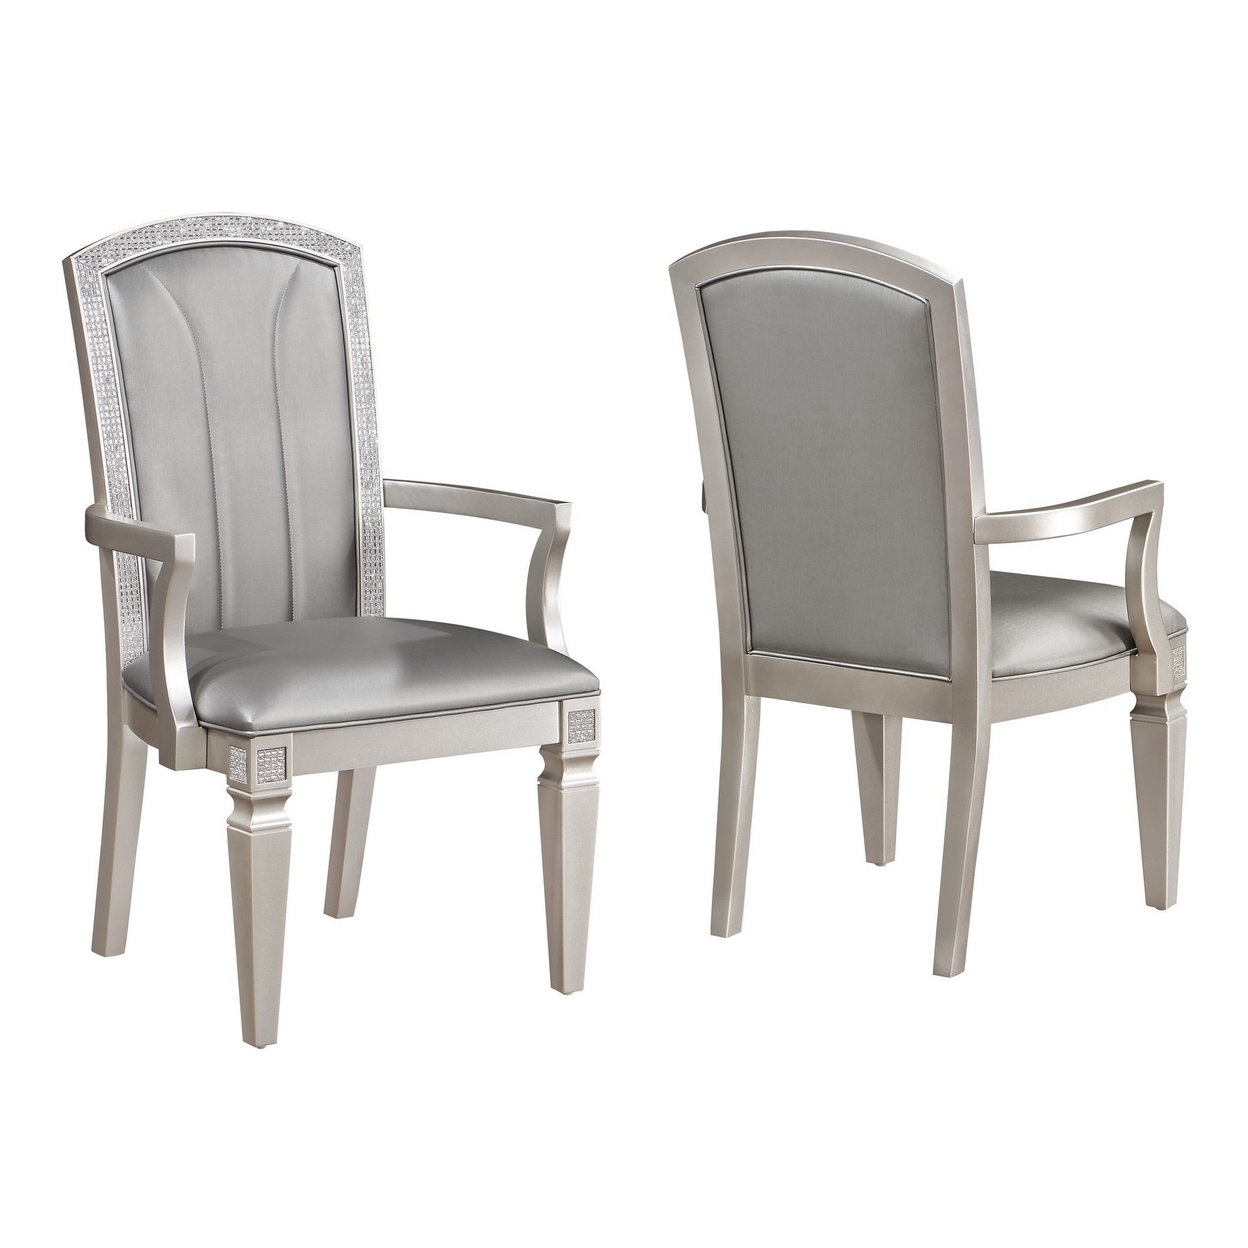 Scott 23 Inch Dining Armchair Set Of 2, Gray Faux Leather And Taupe Wood -Saltoro Sherpi